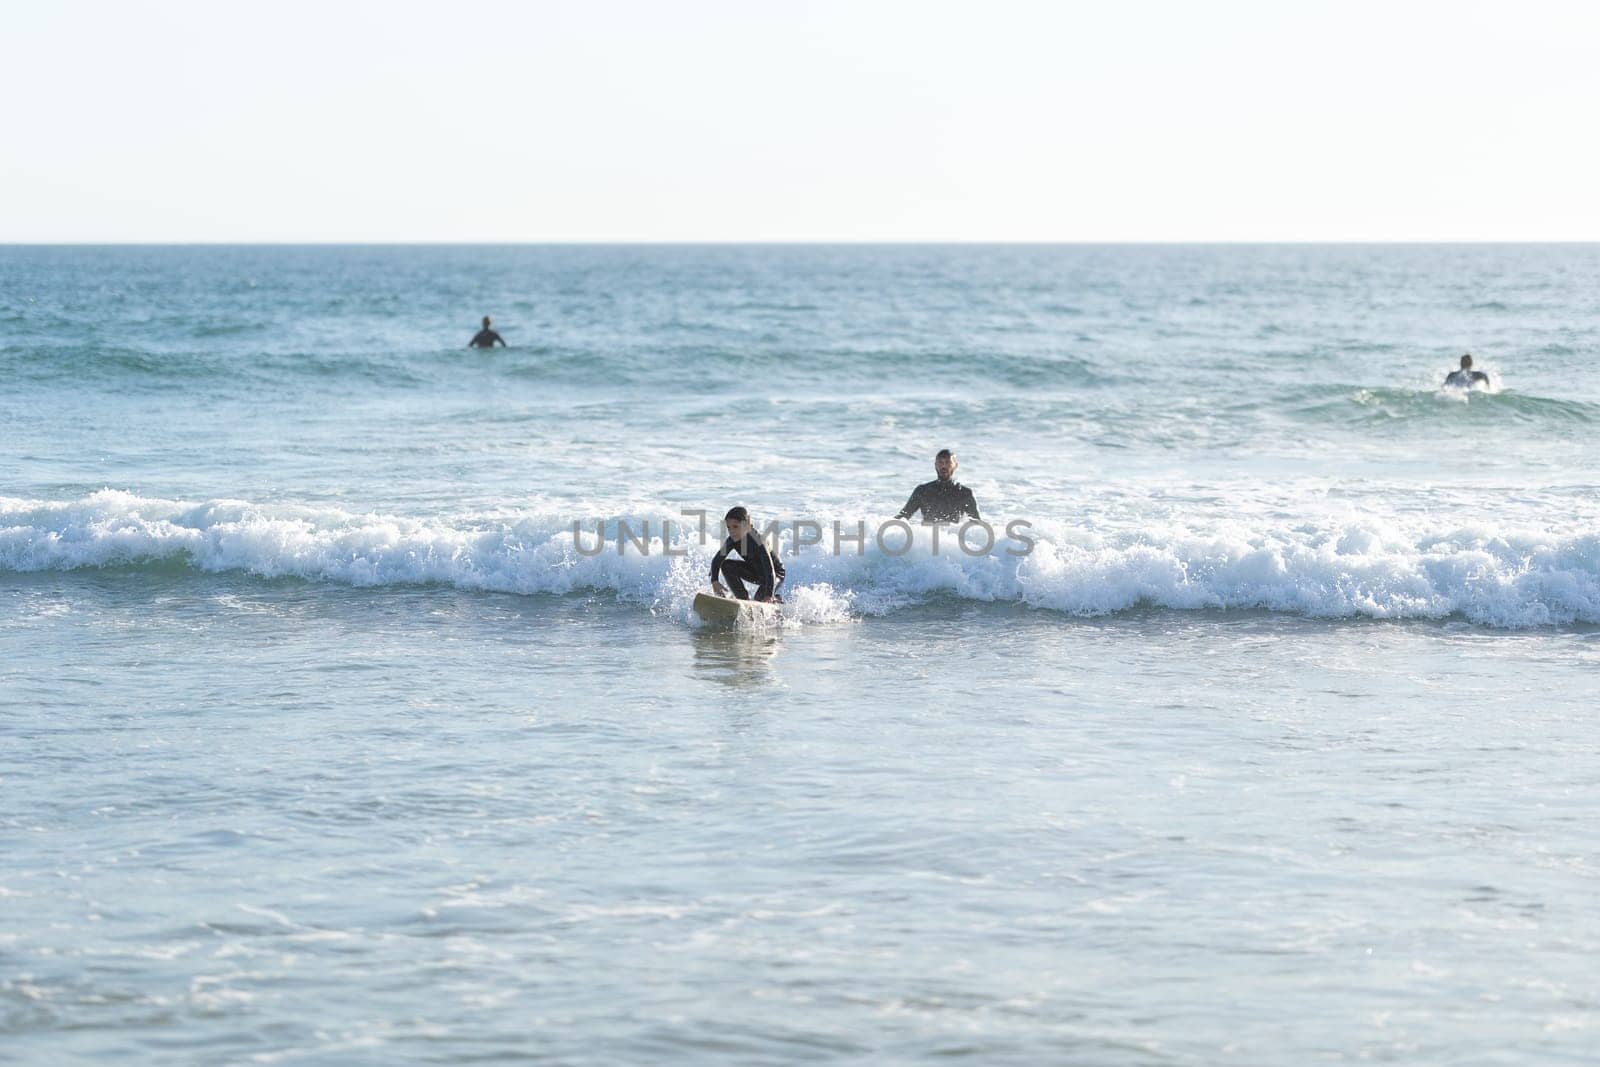 A family of surfers - father teaching his son how to serf. Mid shot